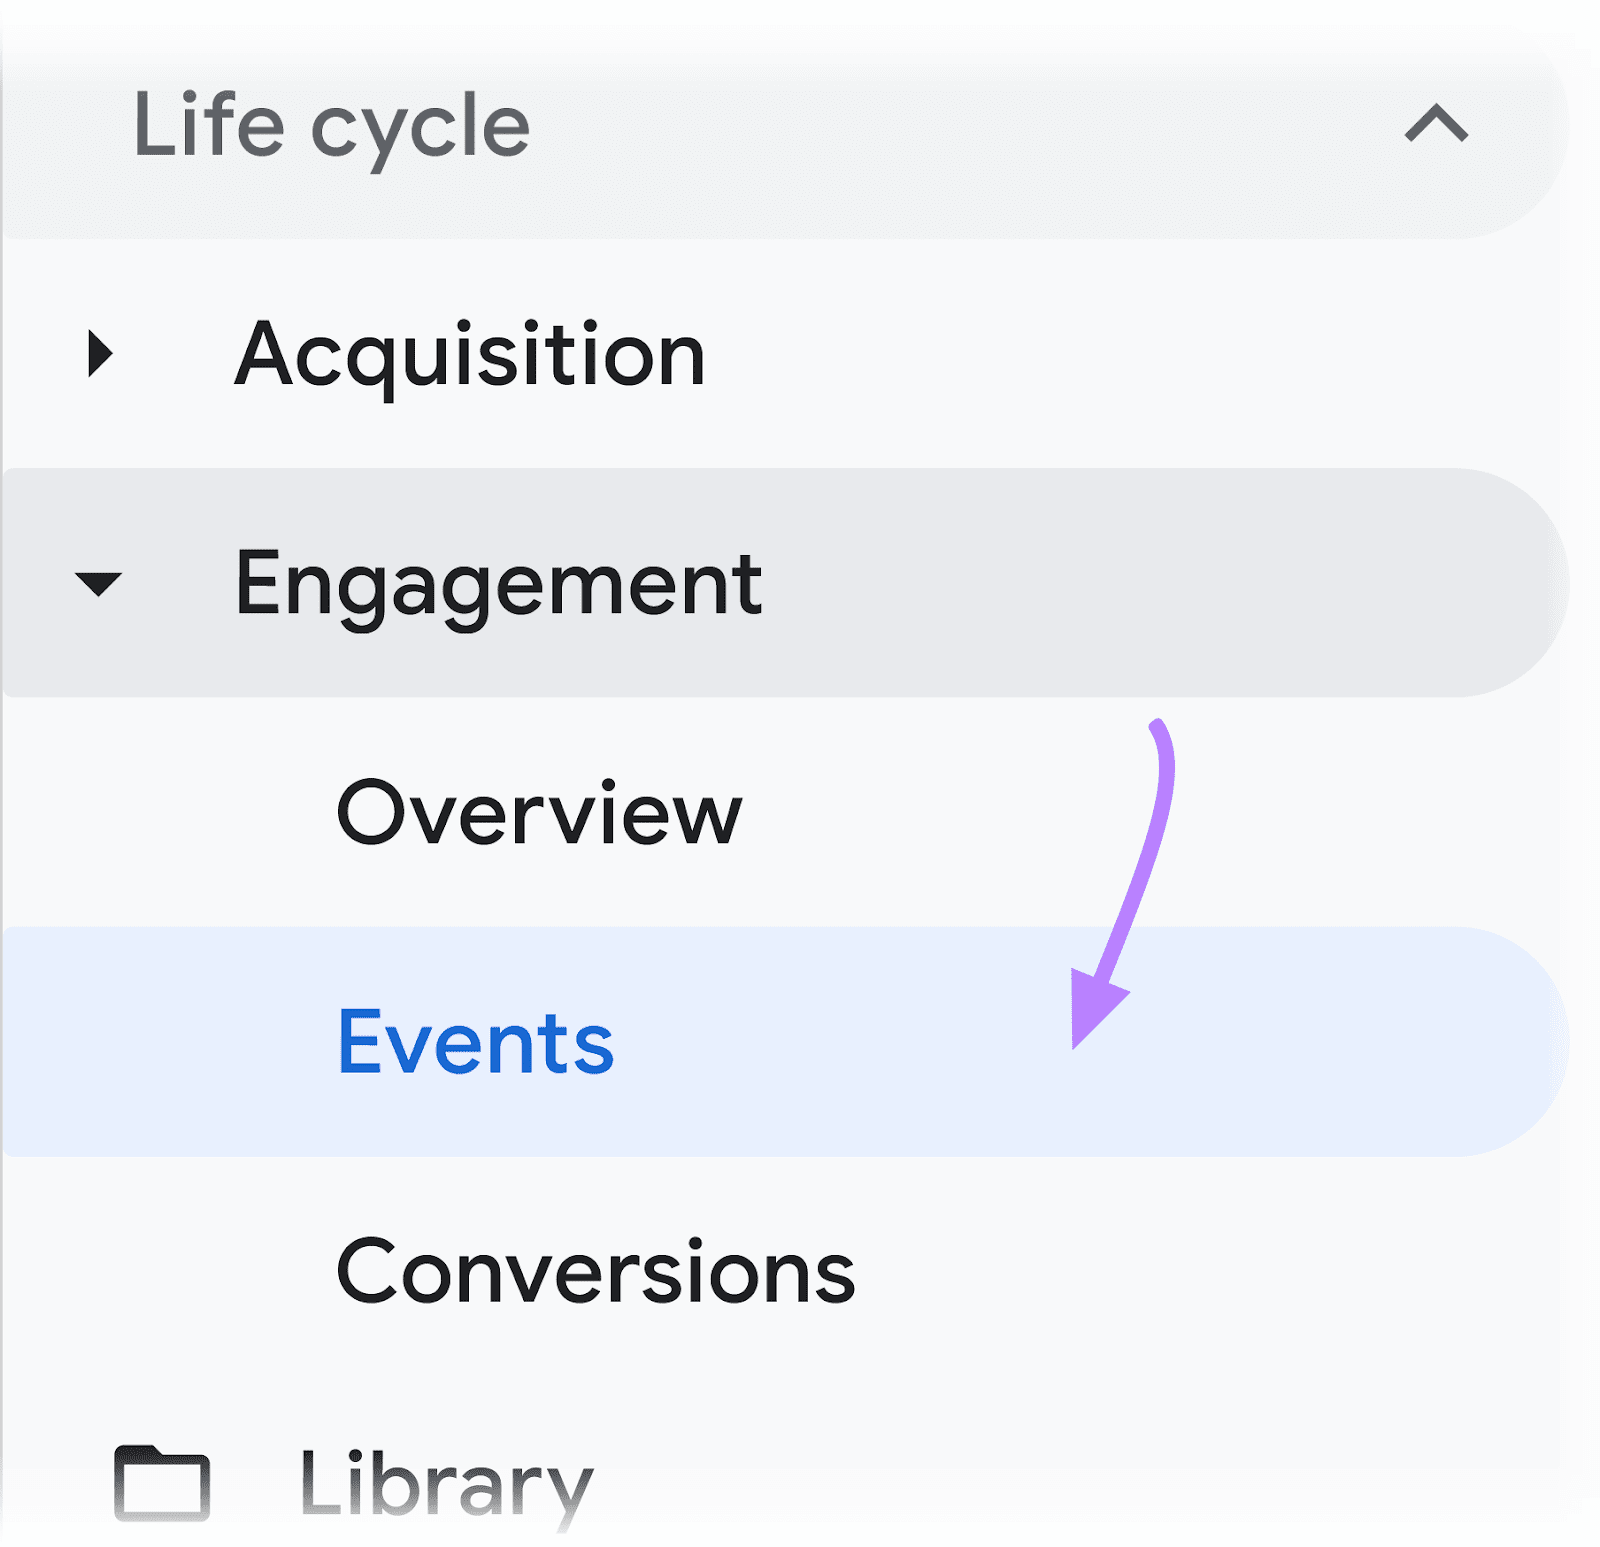 “Events” selected from the “Engagement” reporting area